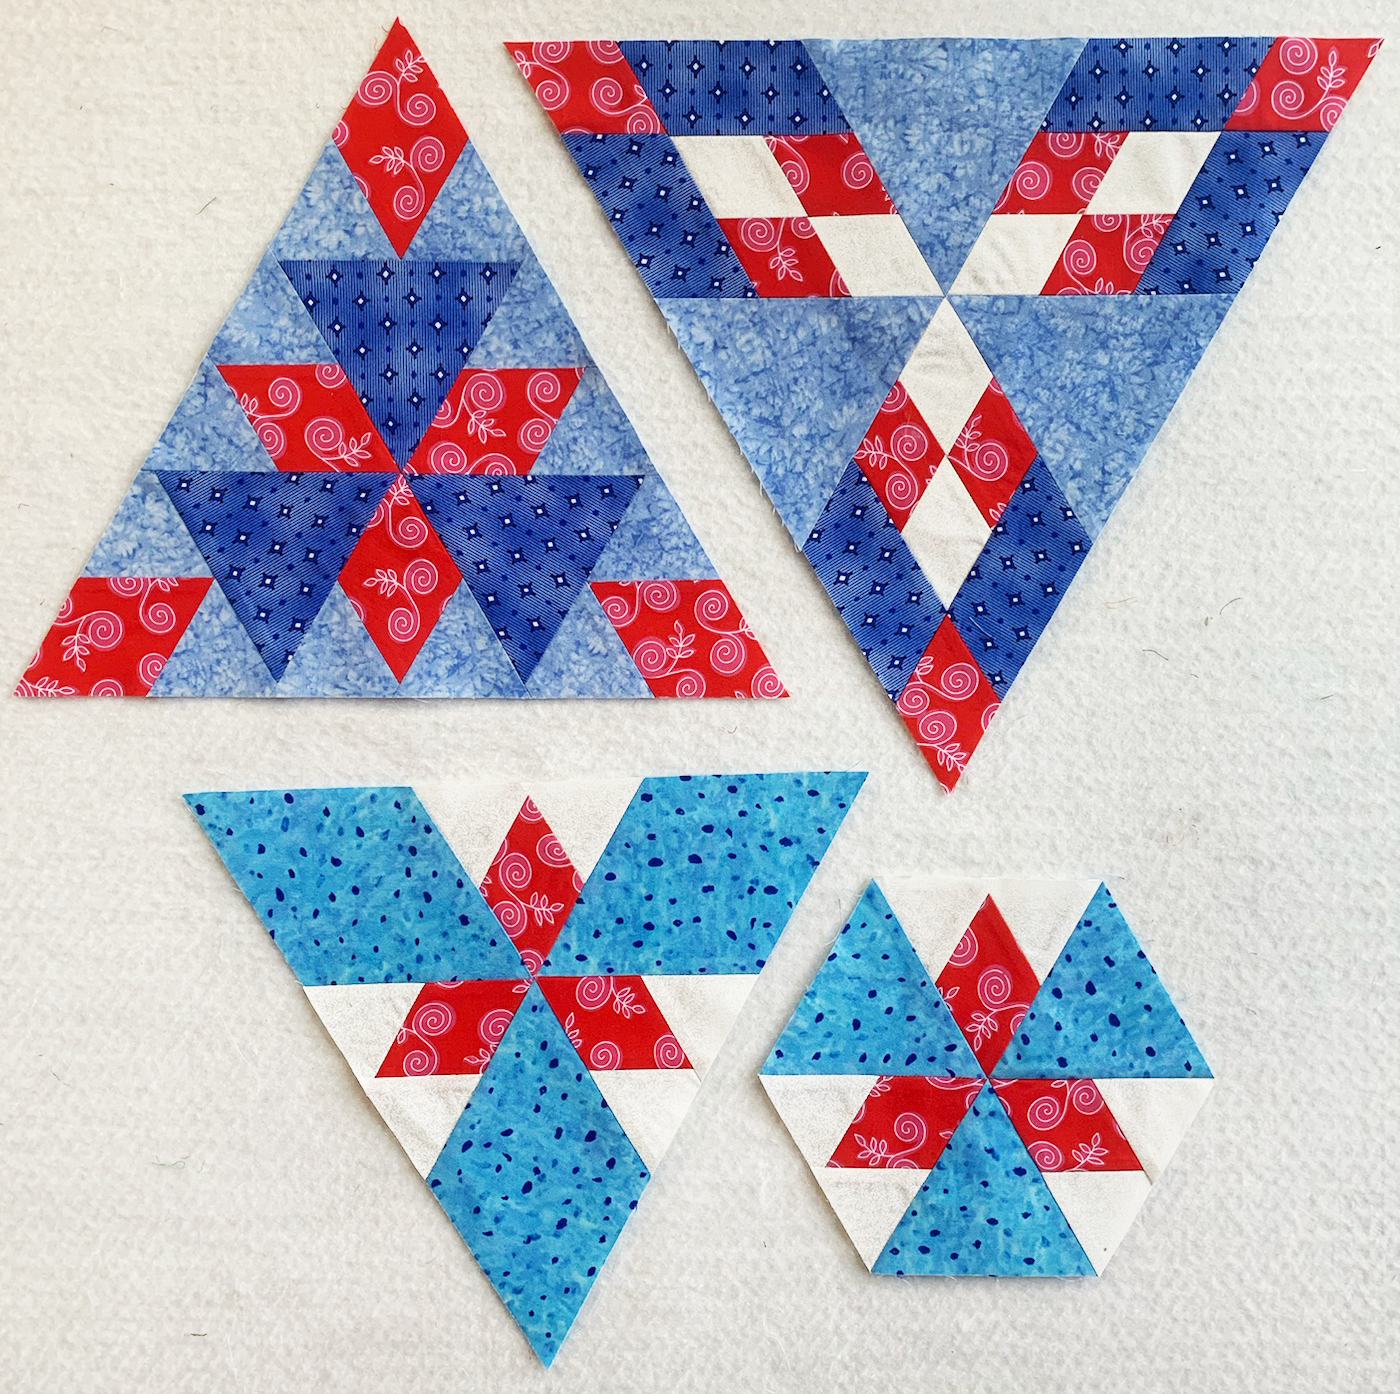 Dee's Saturday Sampler – Using Quilters Select's New 60 Degree Triangle &  Half Square Combo Rulers 